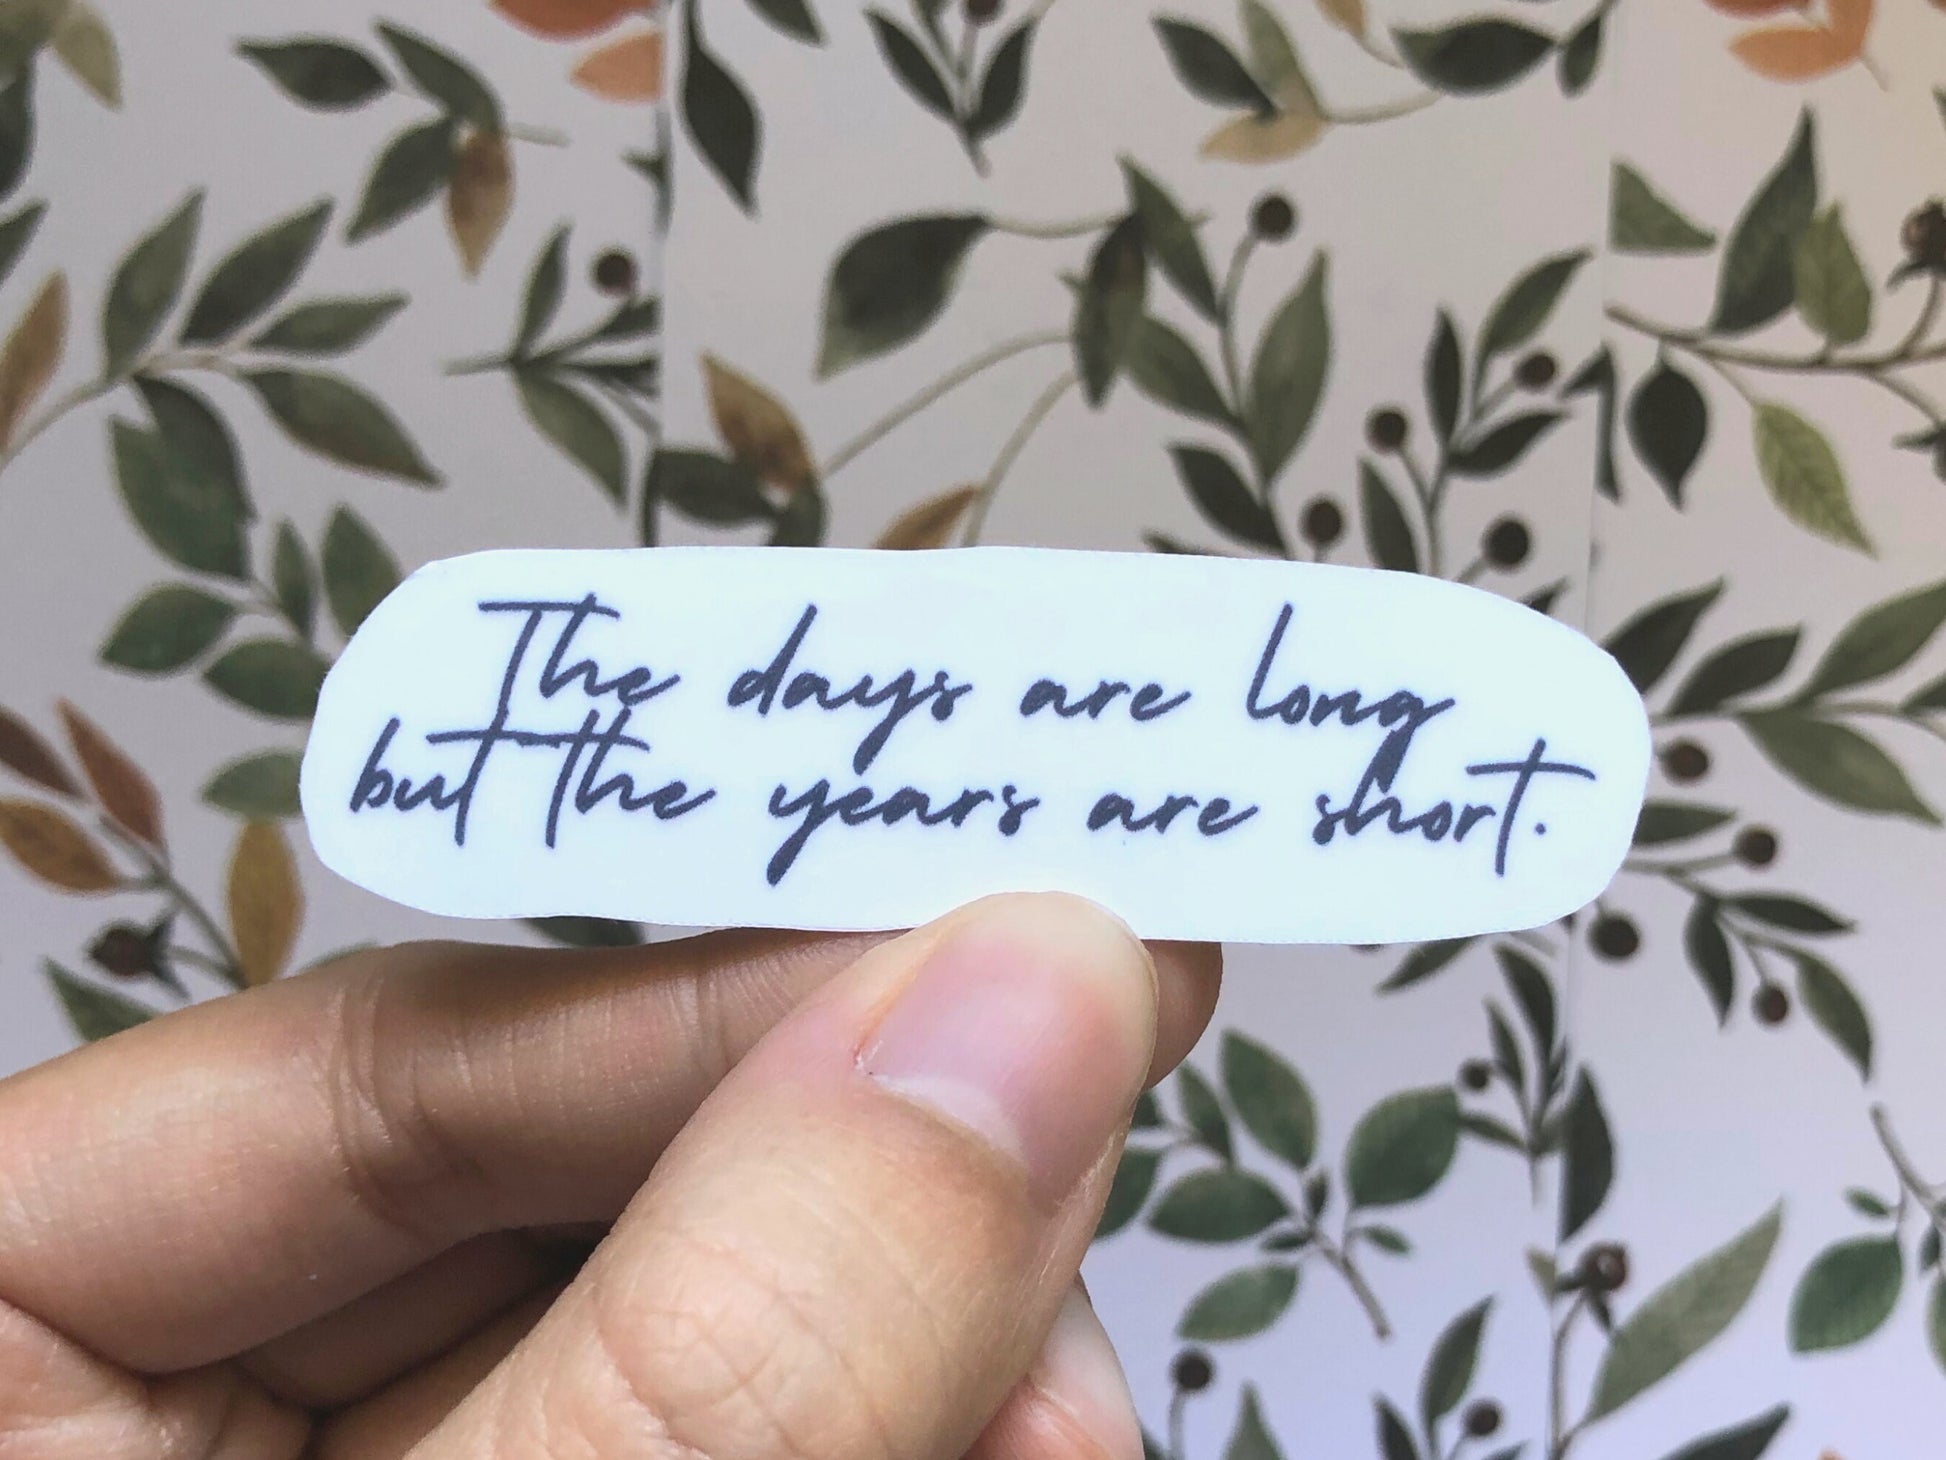 The Days Are Long Sticker | Motivational Stickers | Meaningful Laptop Sticker